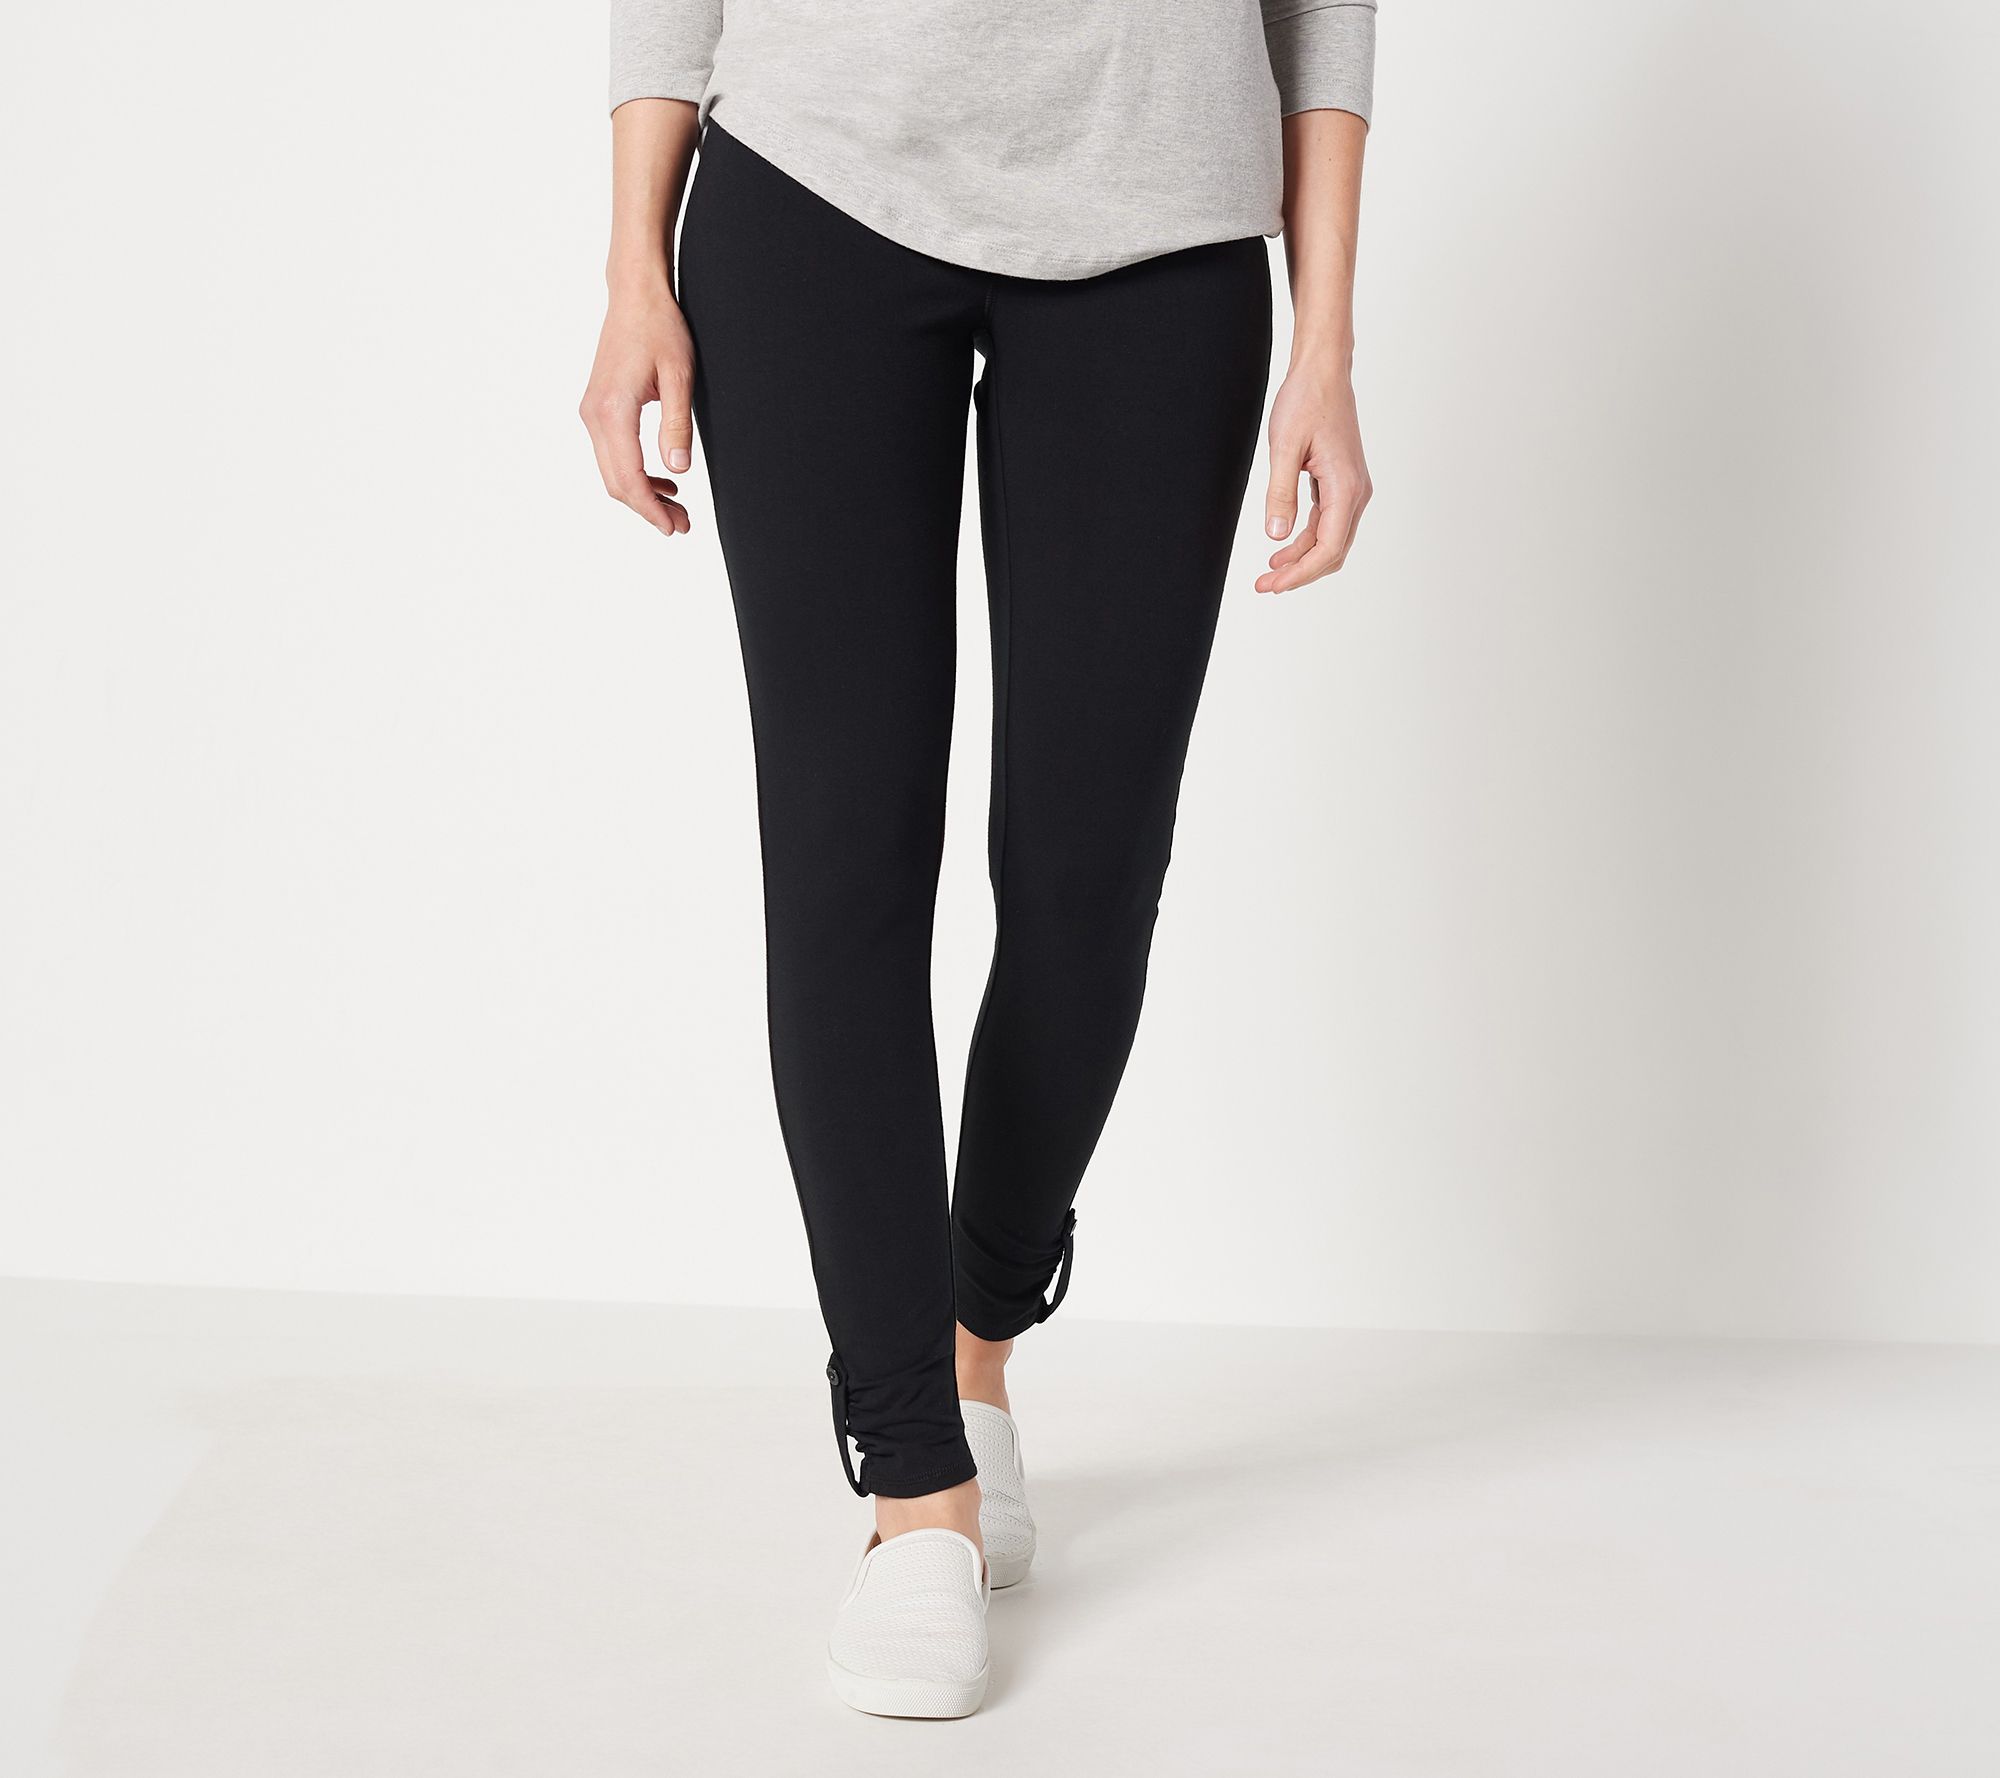 Denim & Co. Active Petite Duo Stretch Pull-On Legging with Ankle